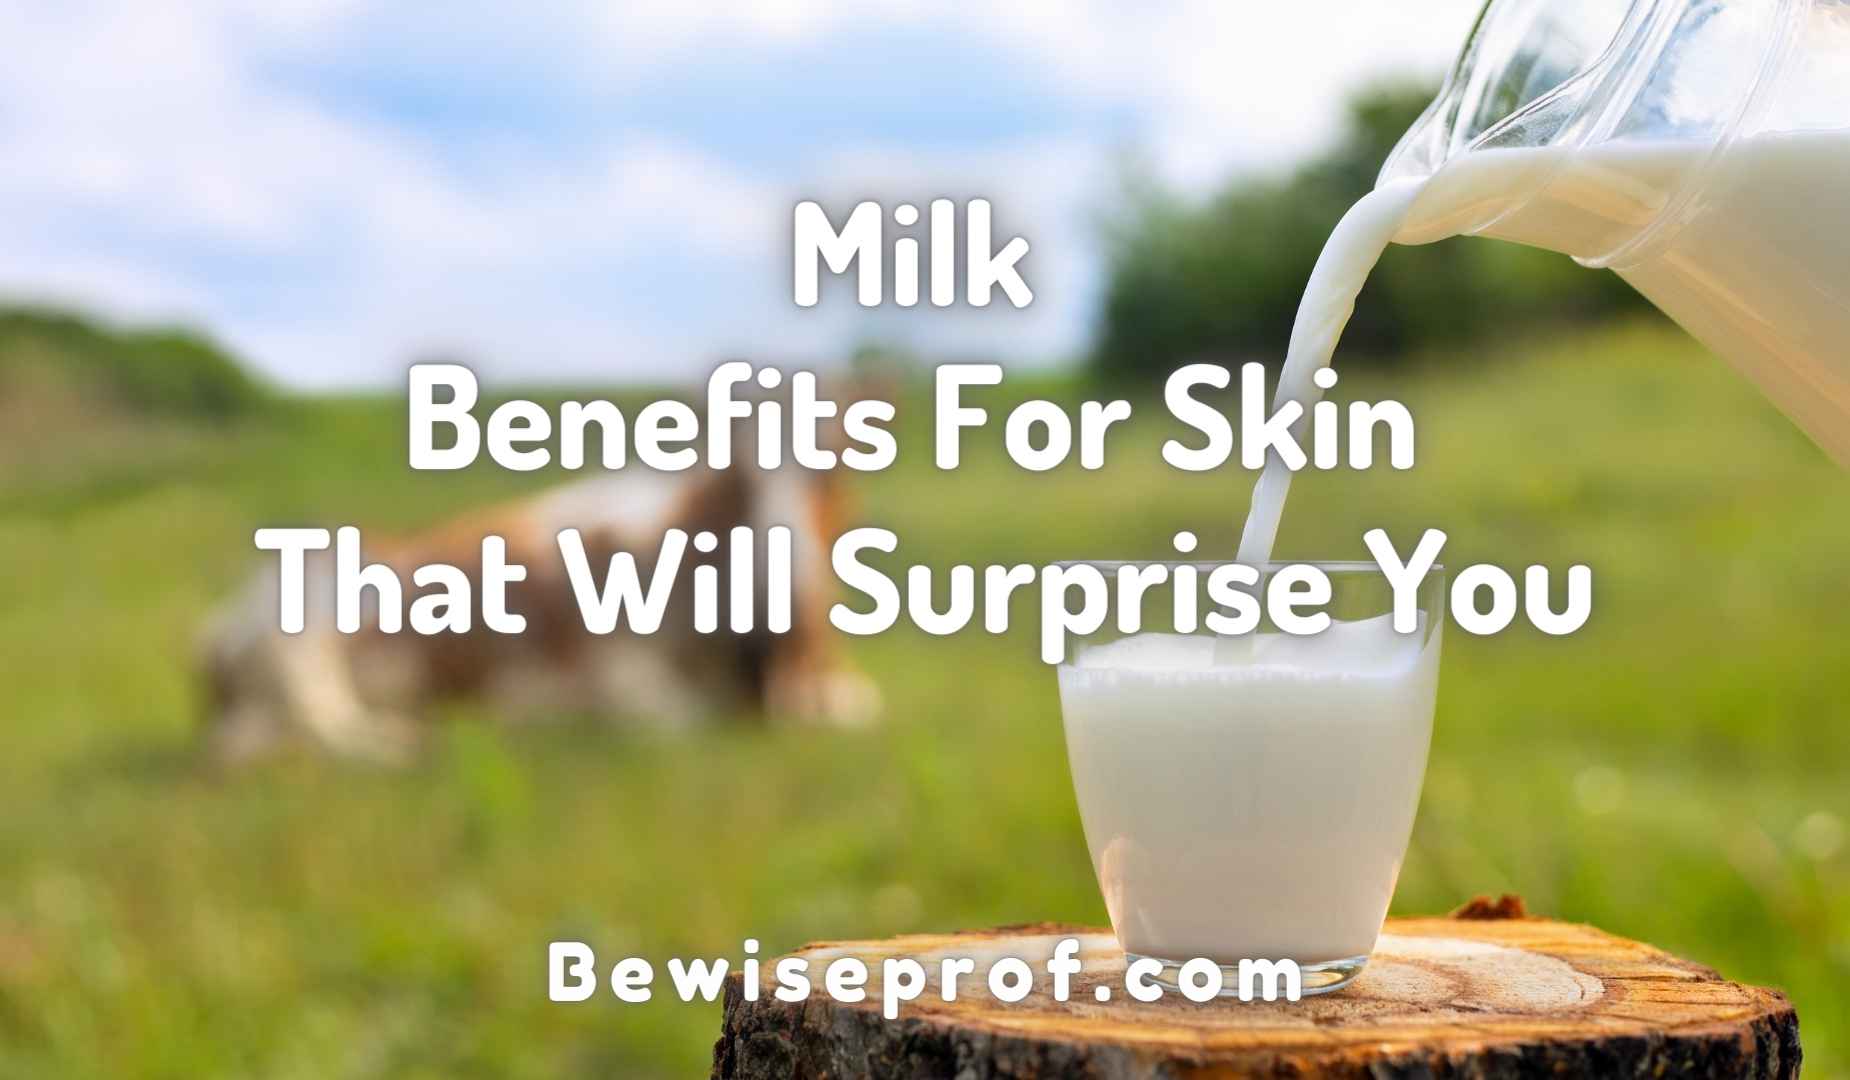 Milk Benefits For Skin That Will Surprise You